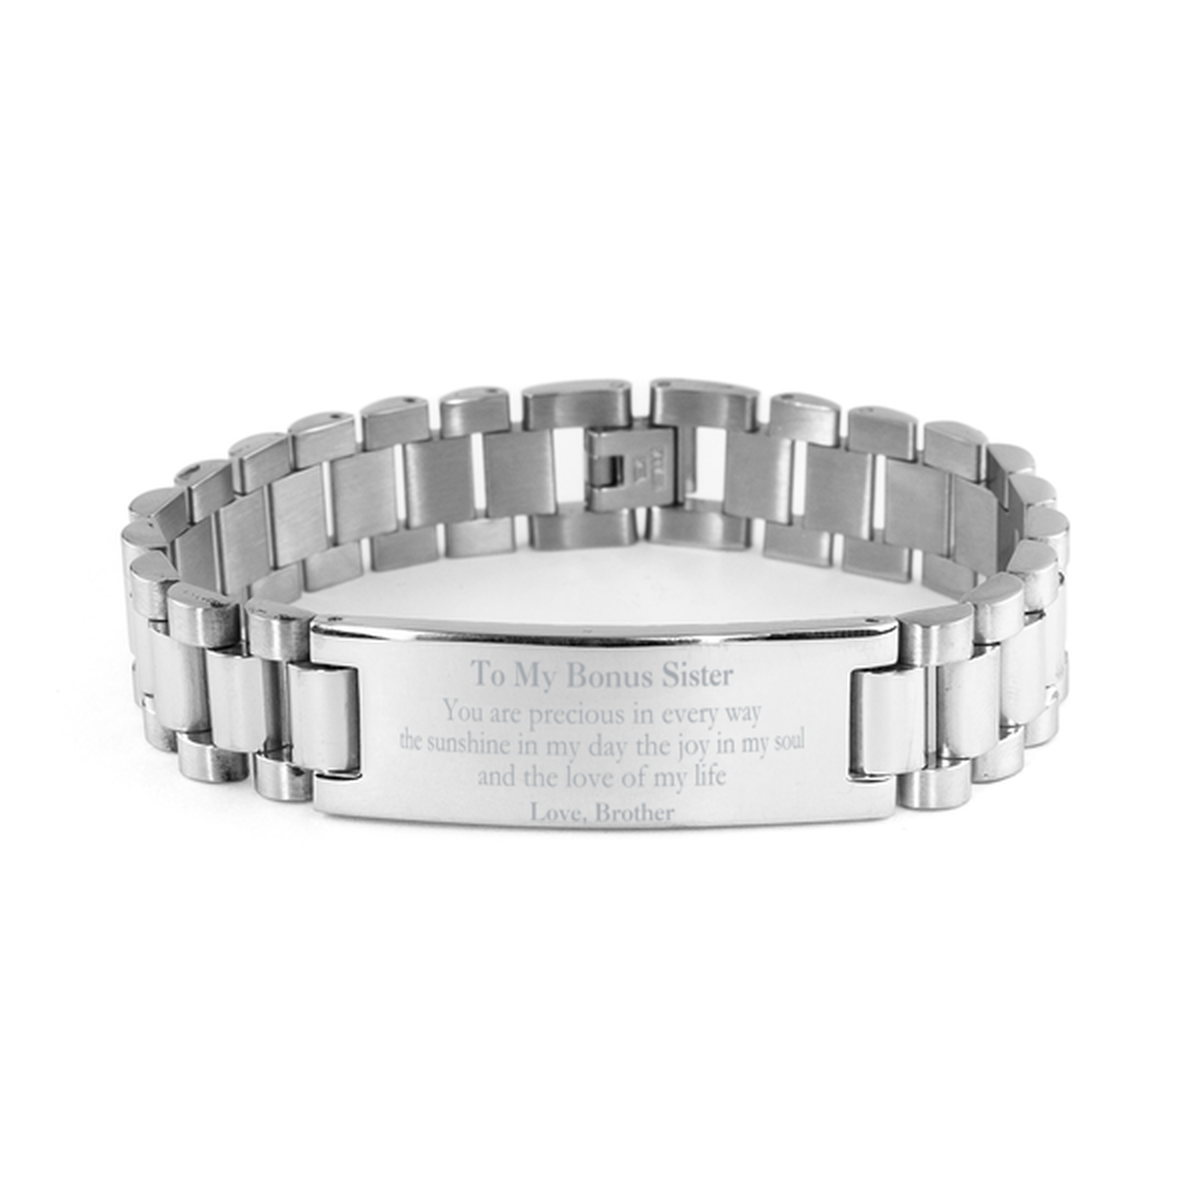 Graduation Gifts for Bonus Sister Ladder Stainless Steel Bracelet Present from Brother, Christmas Bonus Sister Birthday Gifts Bonus Sister You are precious in every way the sunshine in my day. Love, Brother